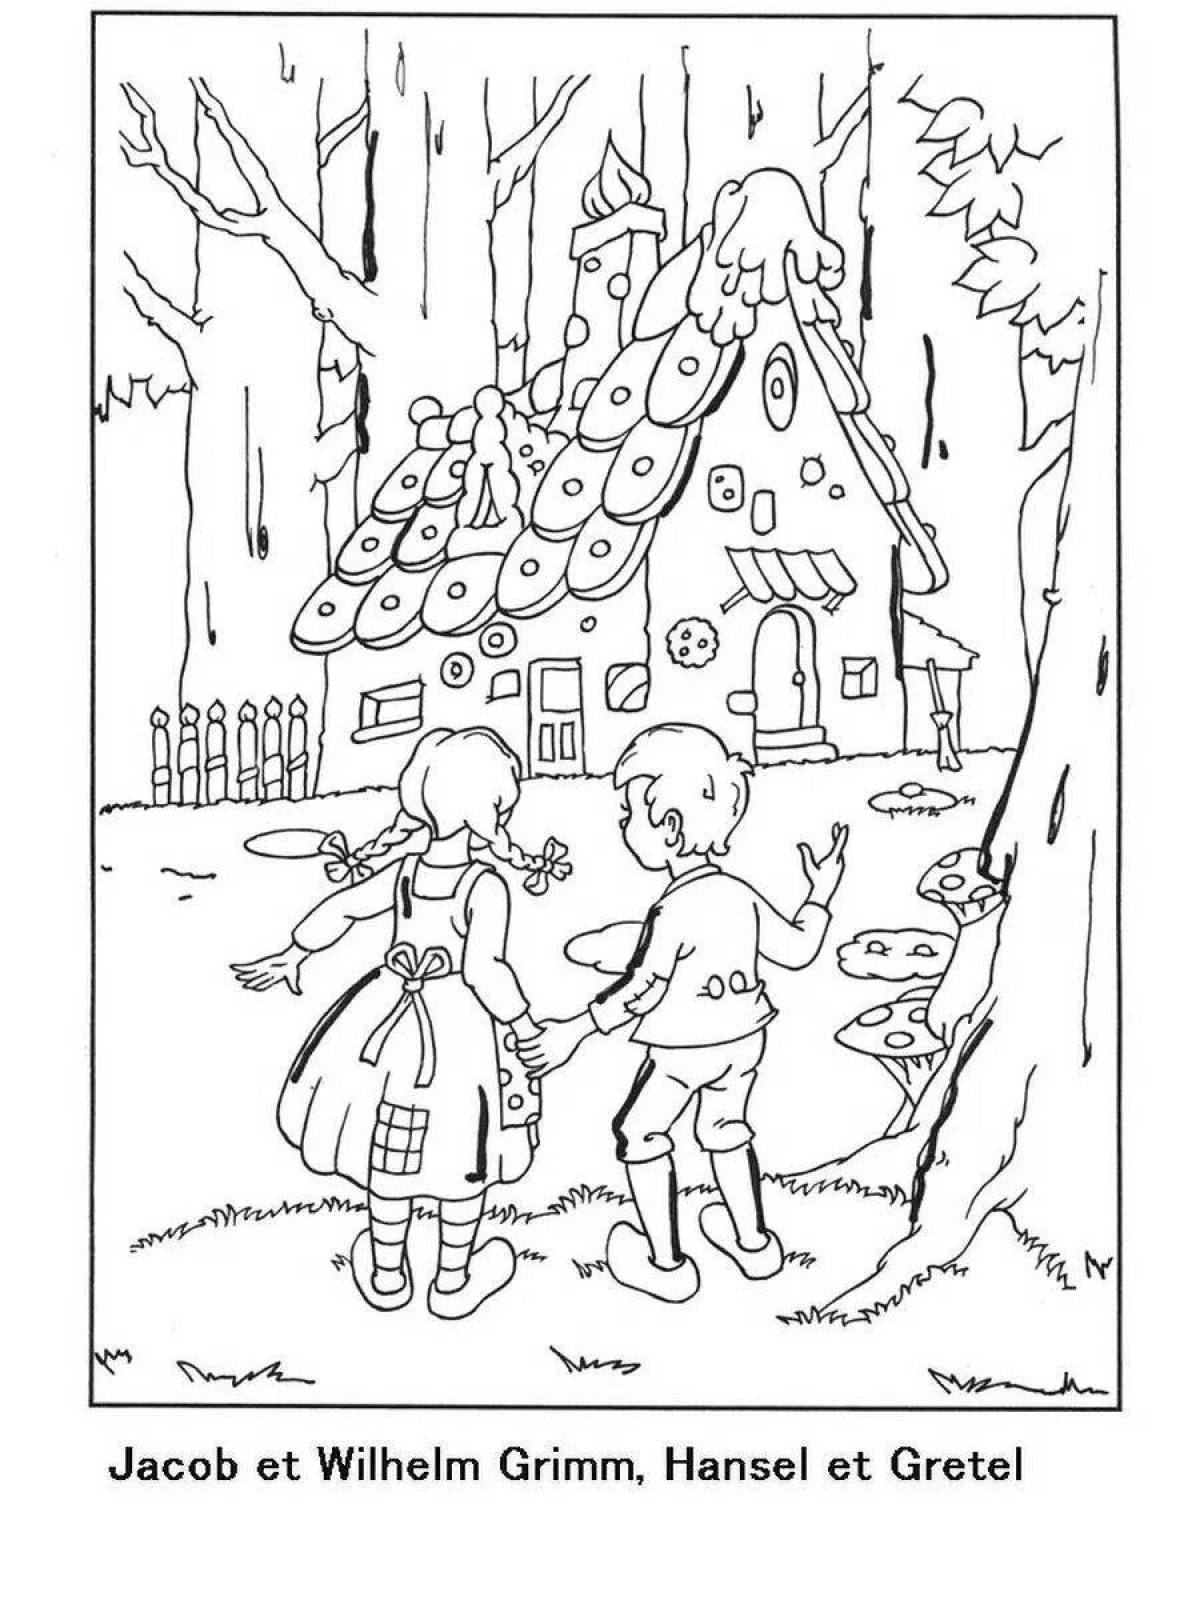 Radiant Hansel and Gretel coloring page